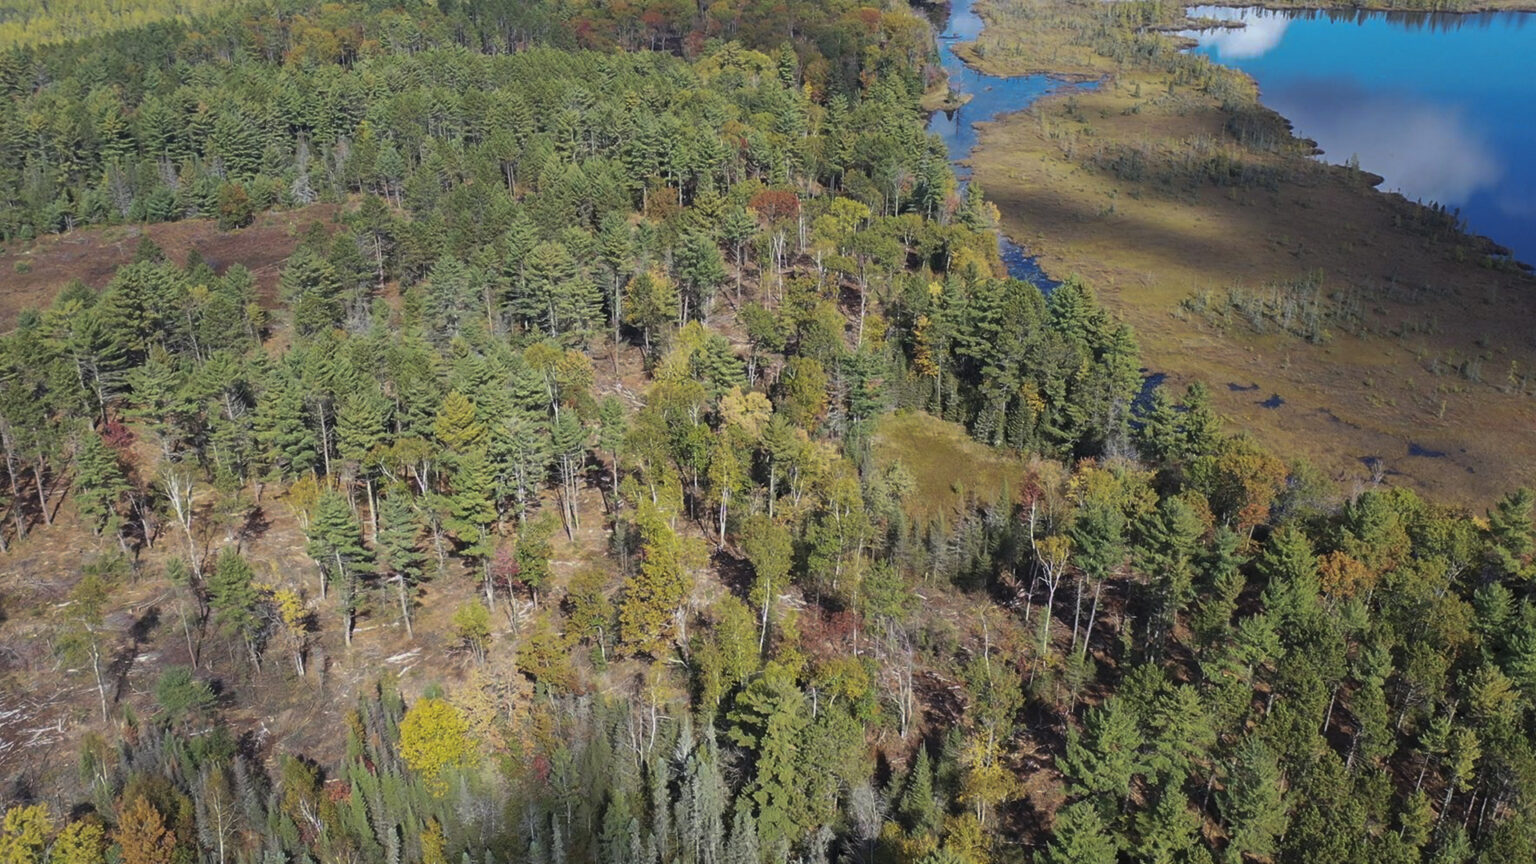 An aerial photo shows a forest of primarily coniferous trees standing next to wetlands and open water that reflects the sky and clouds.